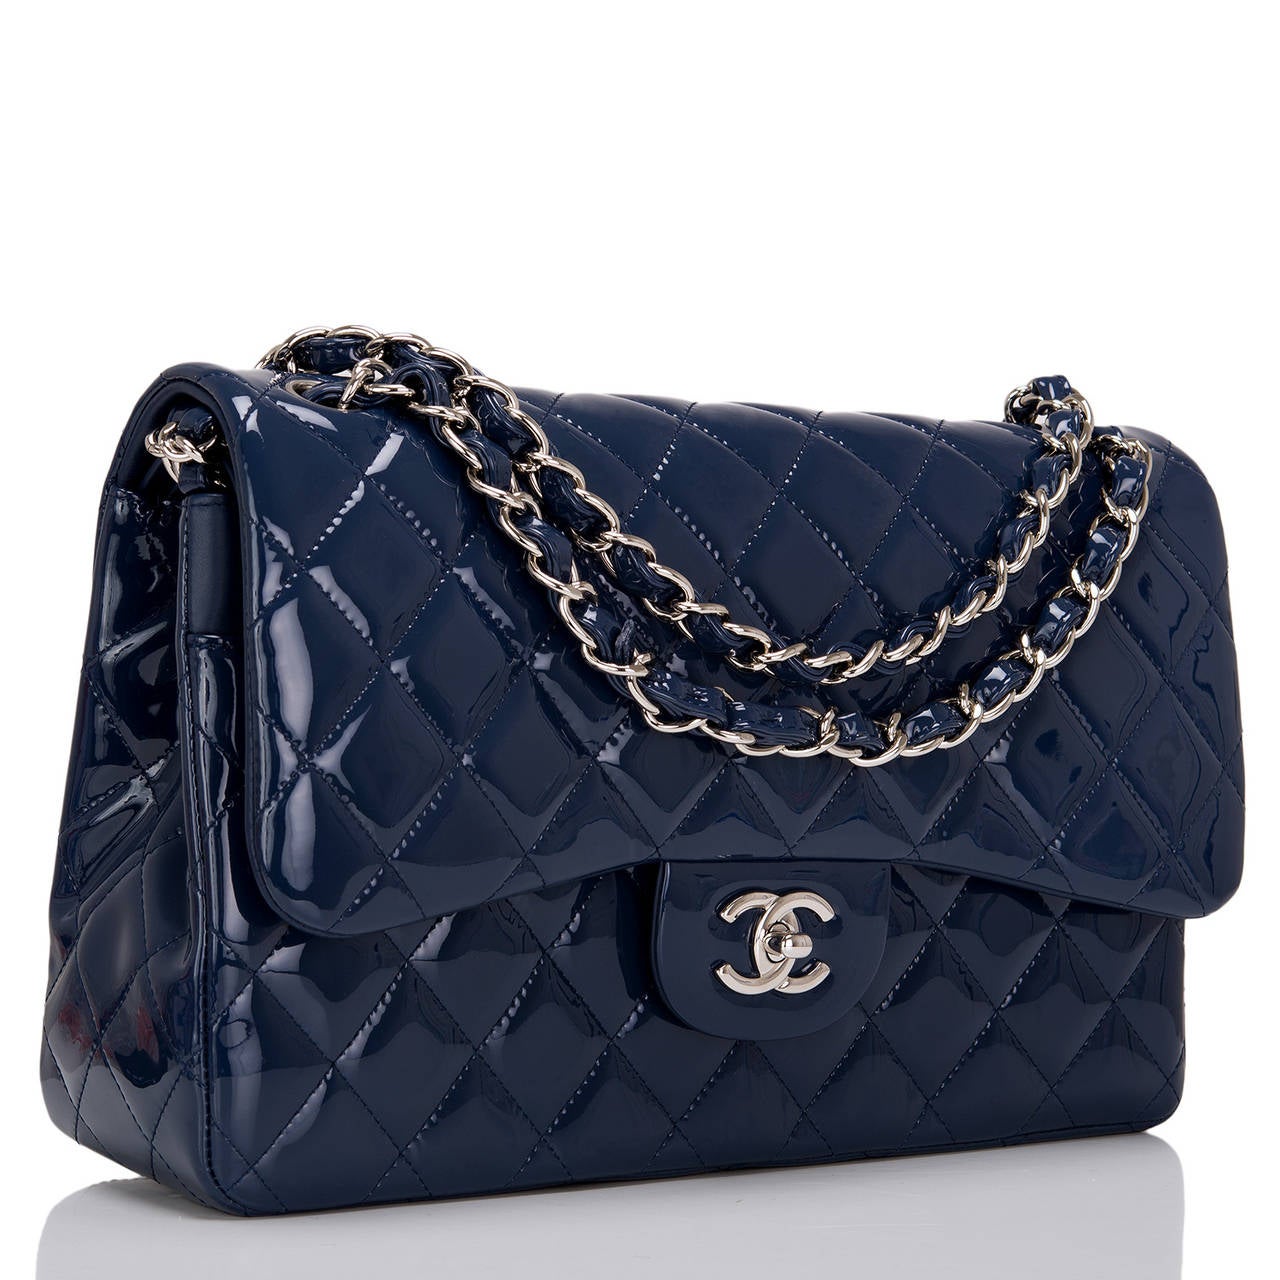 Chanel Jumbo Classic in navy blue quilted patent leather with silver tone hardware; featuring a front flap with signature CC turnlock closure, half moon back pocket, and an adjustable interwoven silver tone chain link and navy leather shoulder